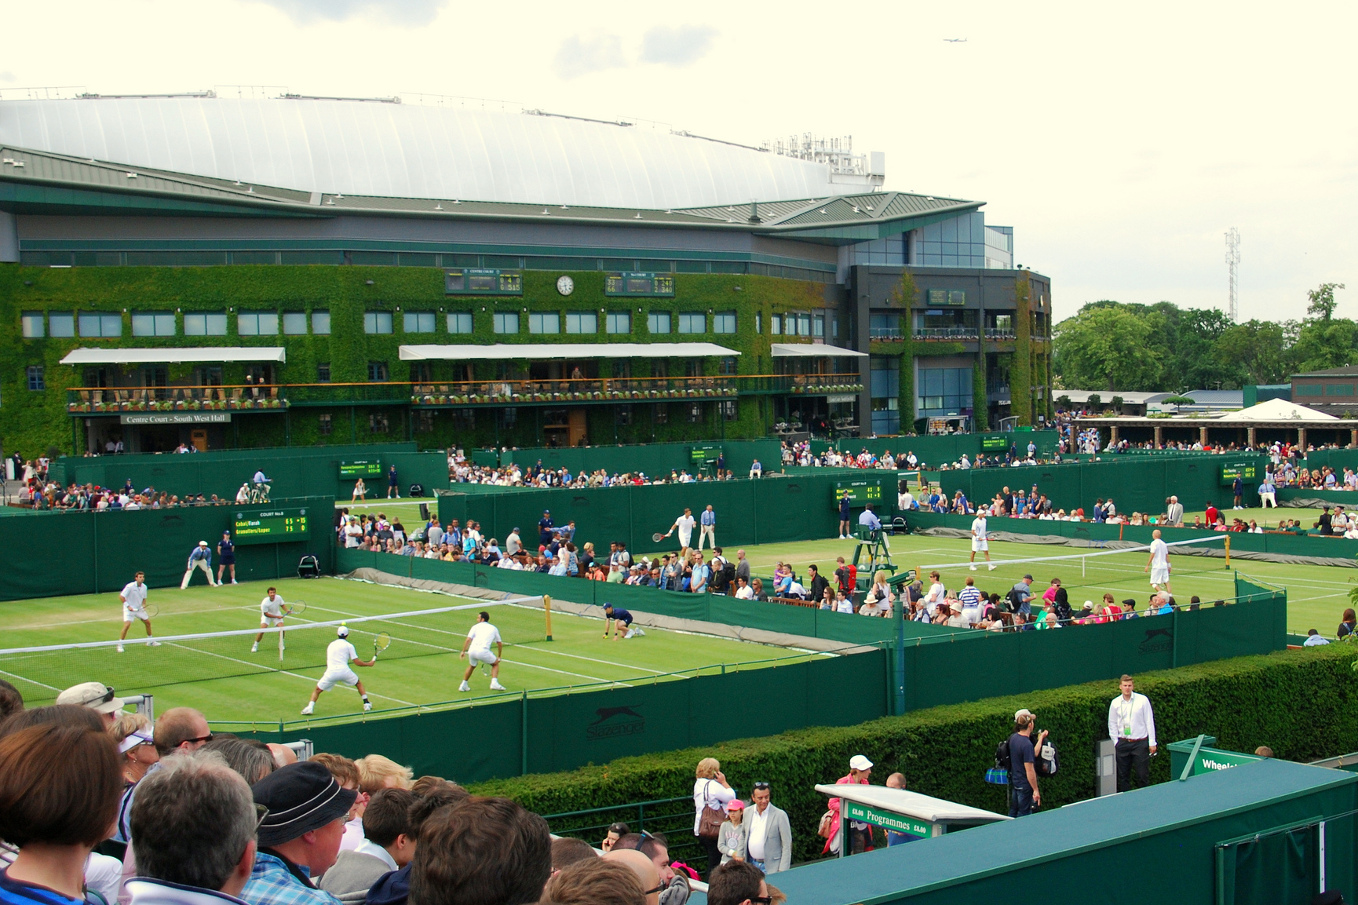 Wimbledon, as seen from Court 12. Image by Carine06 / CC BY-SA 2.0